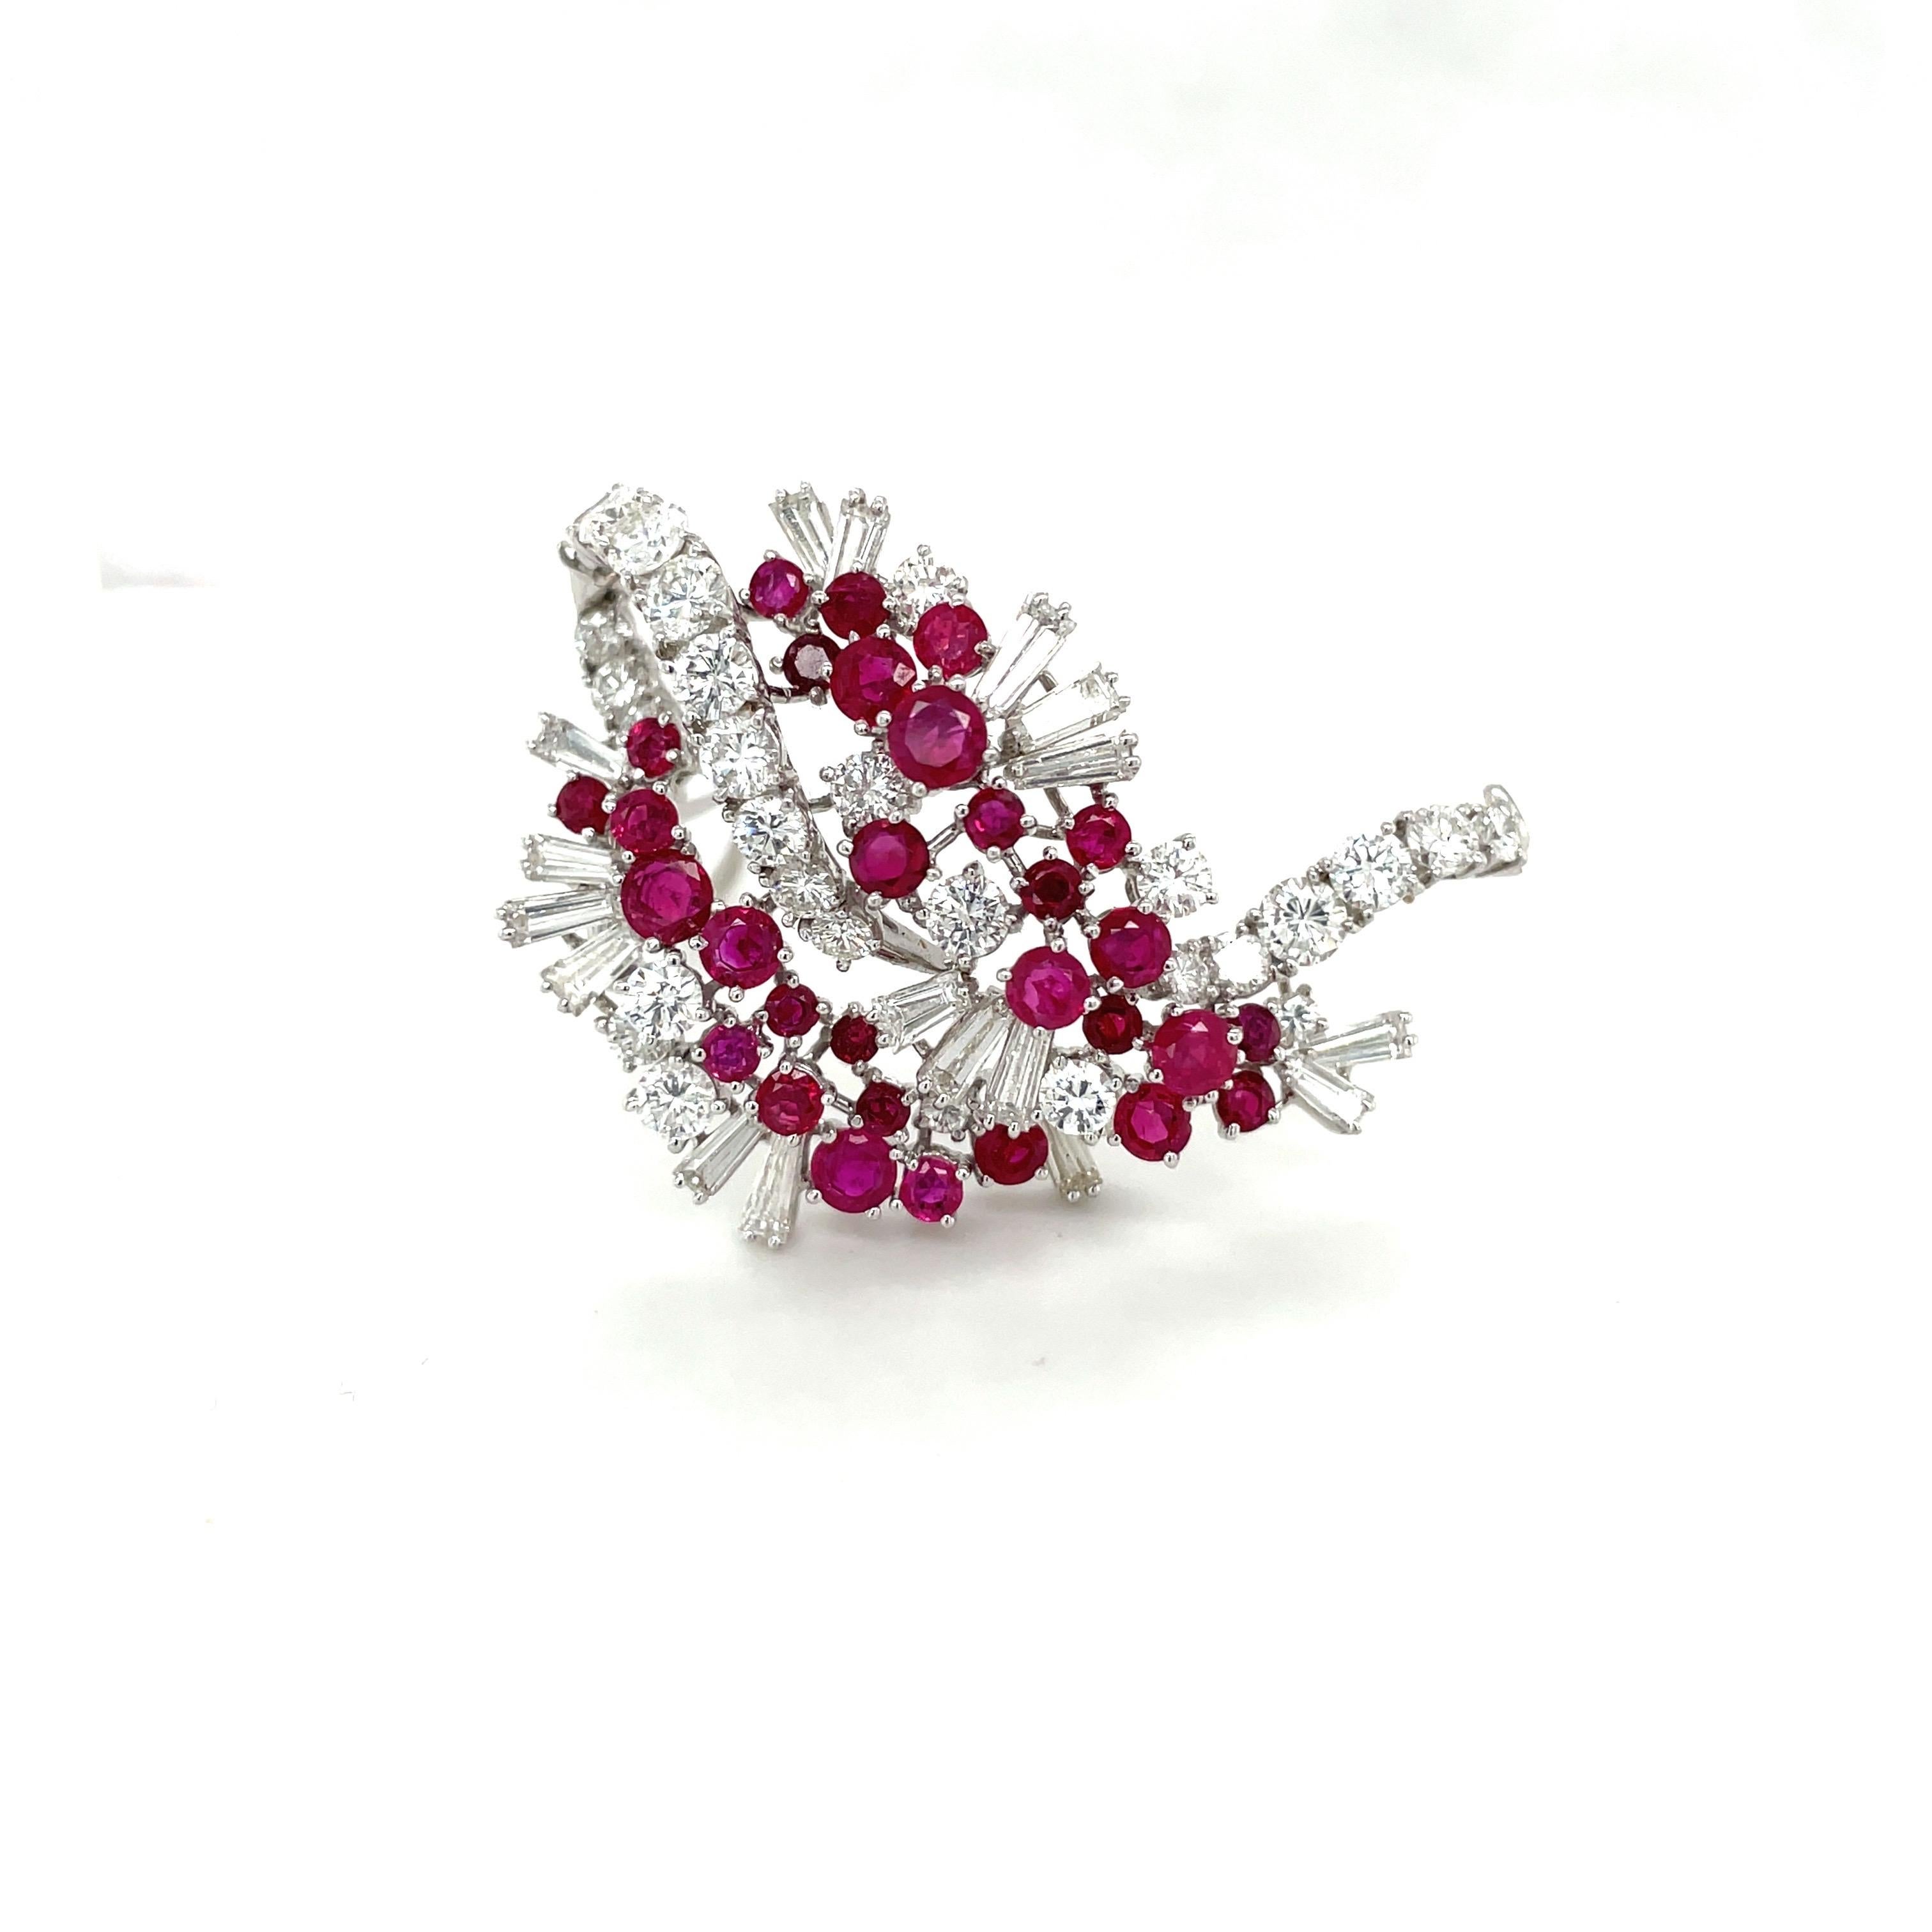 18KT White Gold 4.88Ct Ruby 6.18 Ct Round & Baguette Diamond Ribbon Brooch For Sale 5